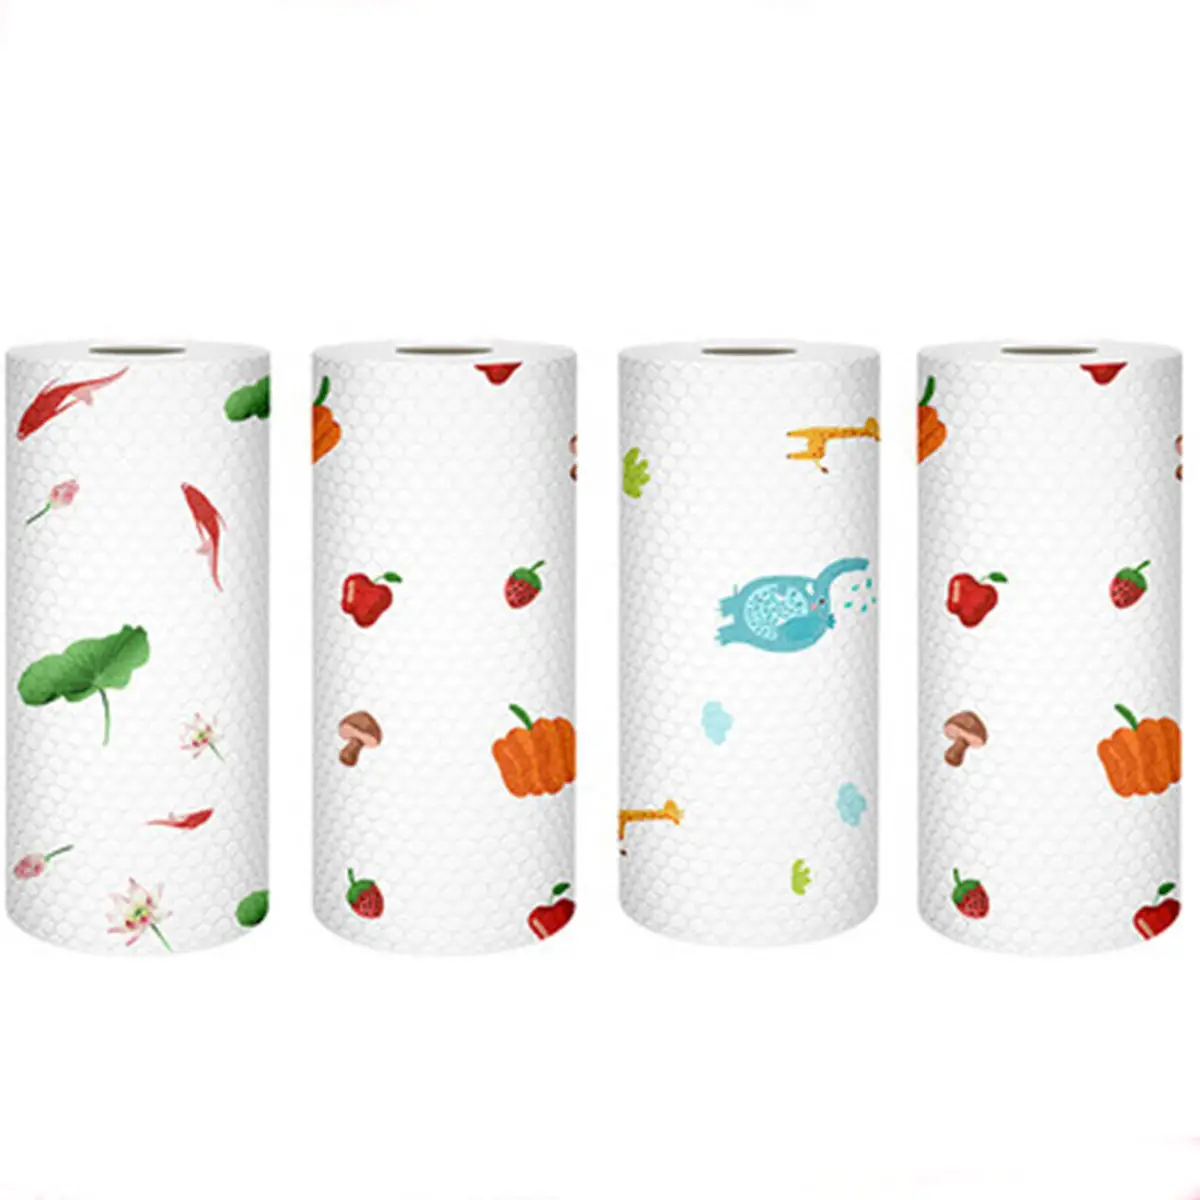 Factory Price Lazy Rag Kitchen Tissue Rolls Reusable Paper Towel Household Kitchen Cleaning Paper Rolls